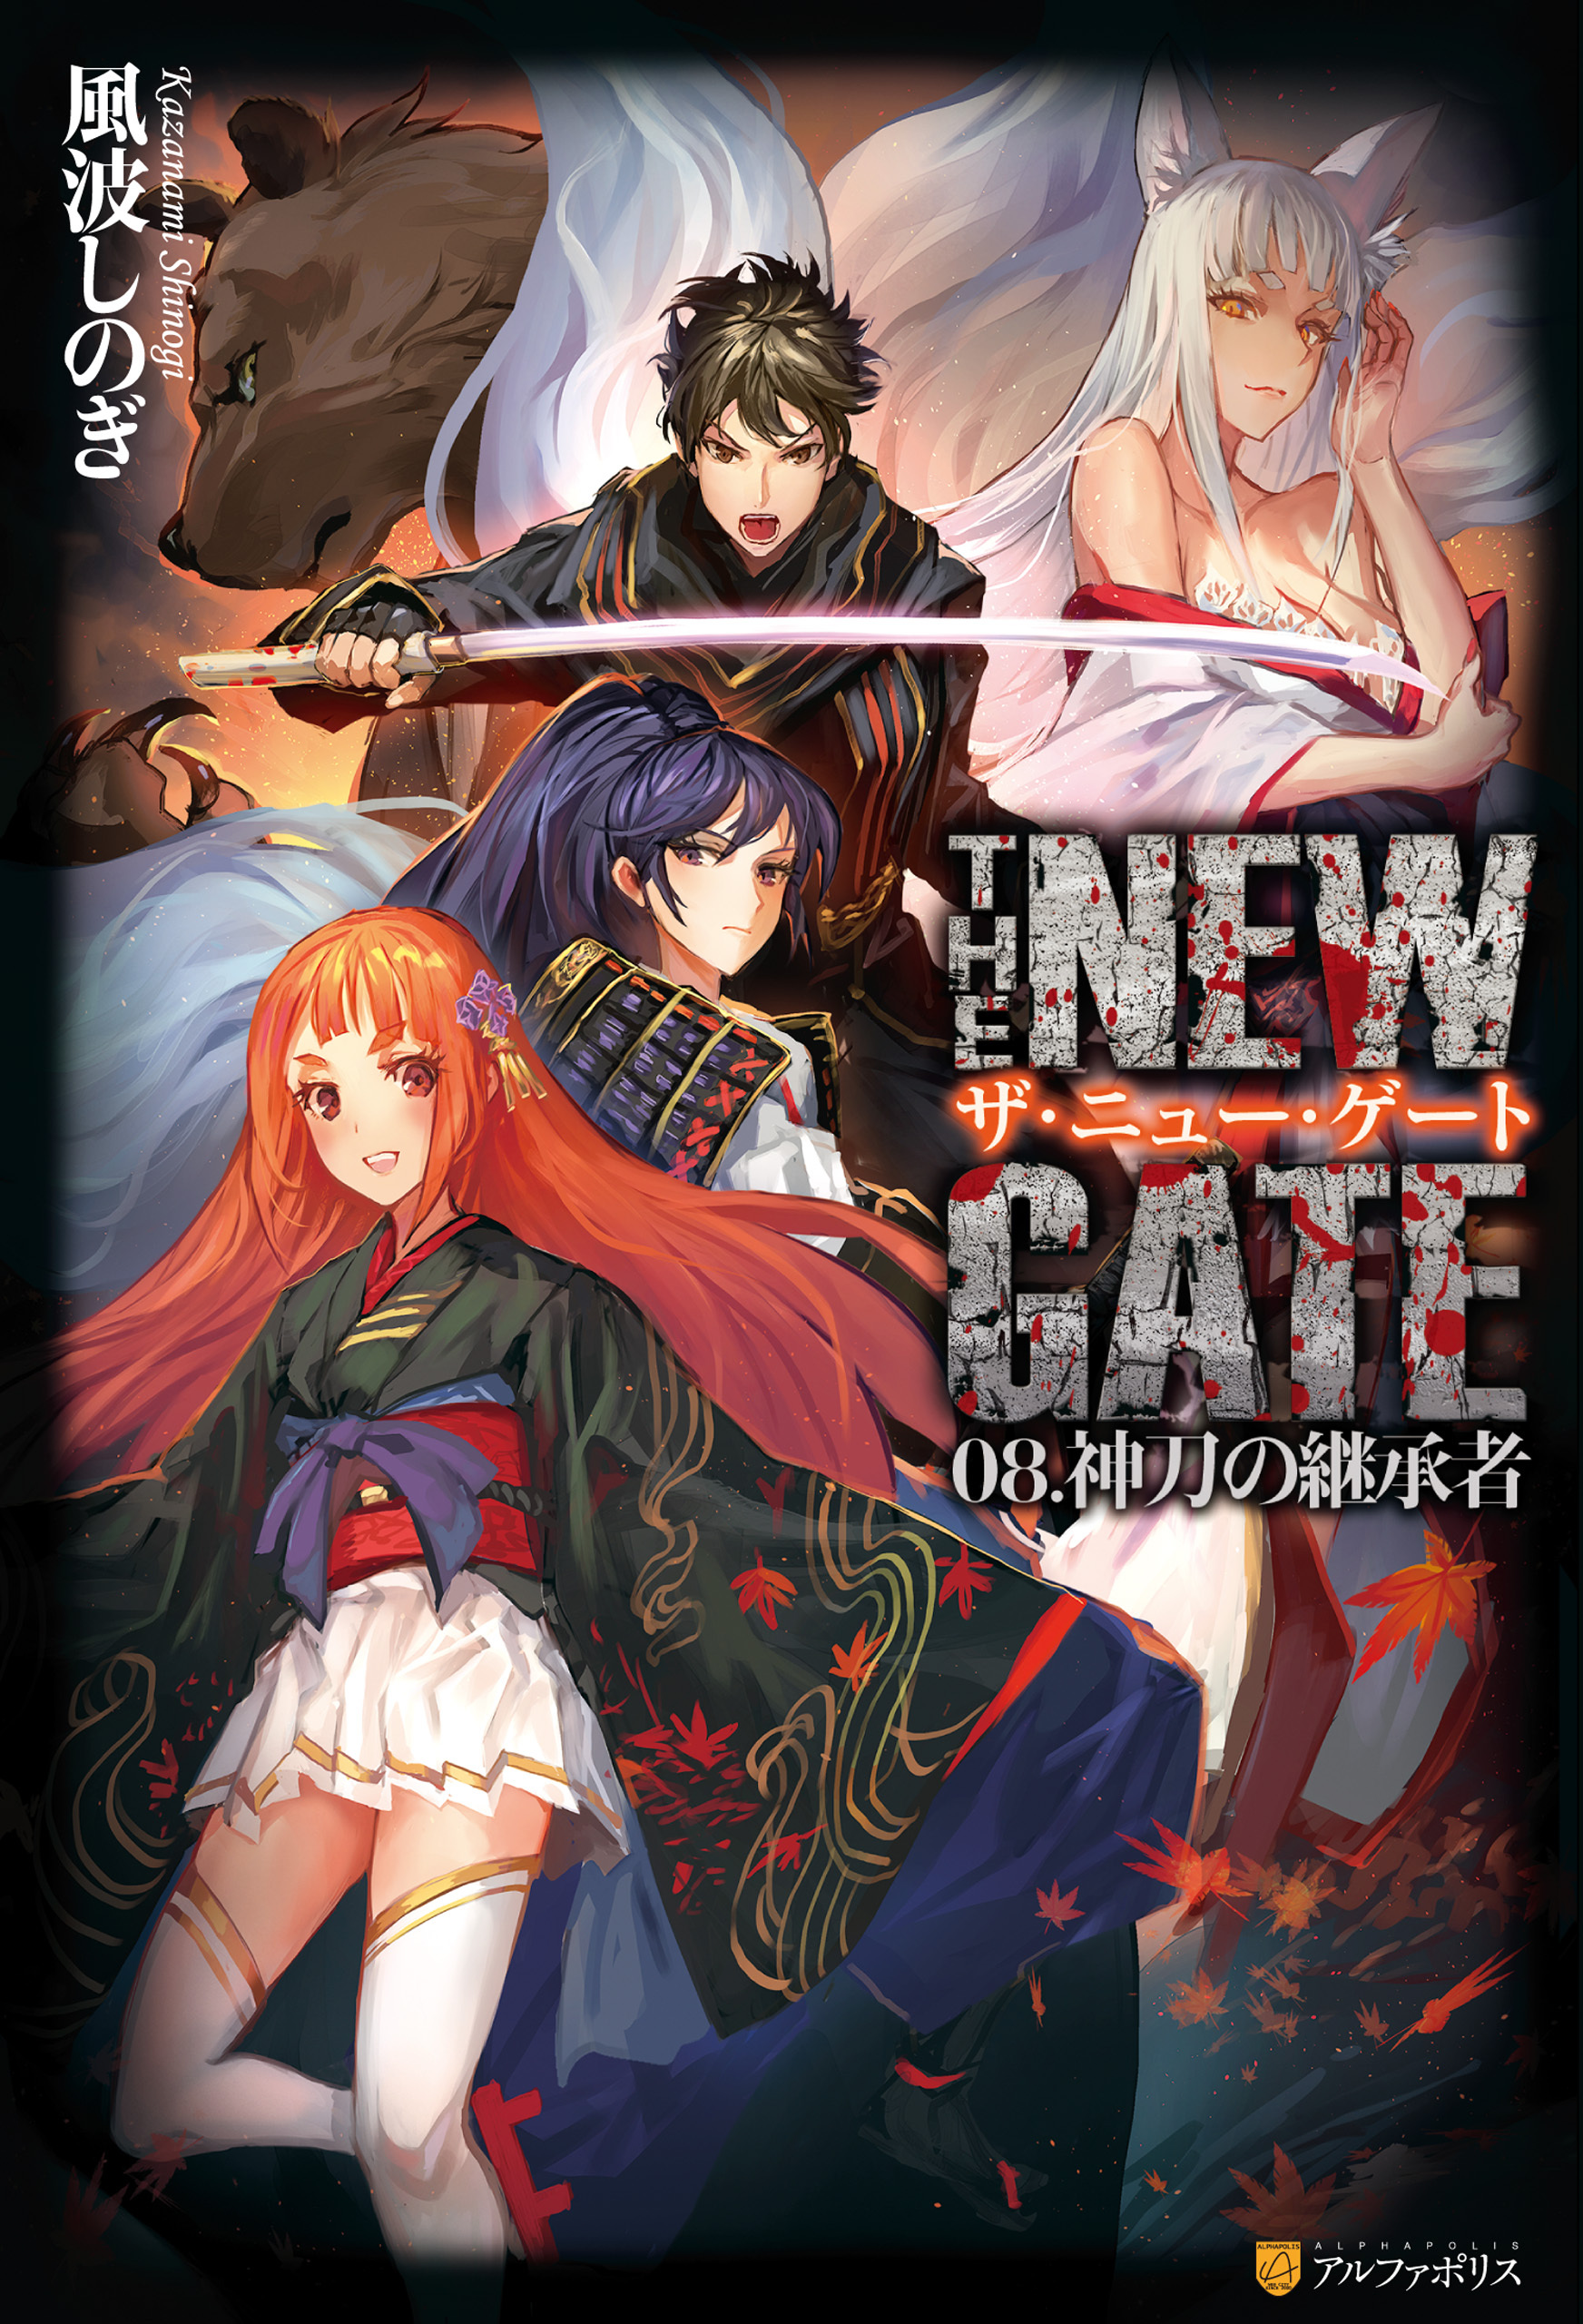 THE NEW GATE 漫画全巻セット - 全巻セット